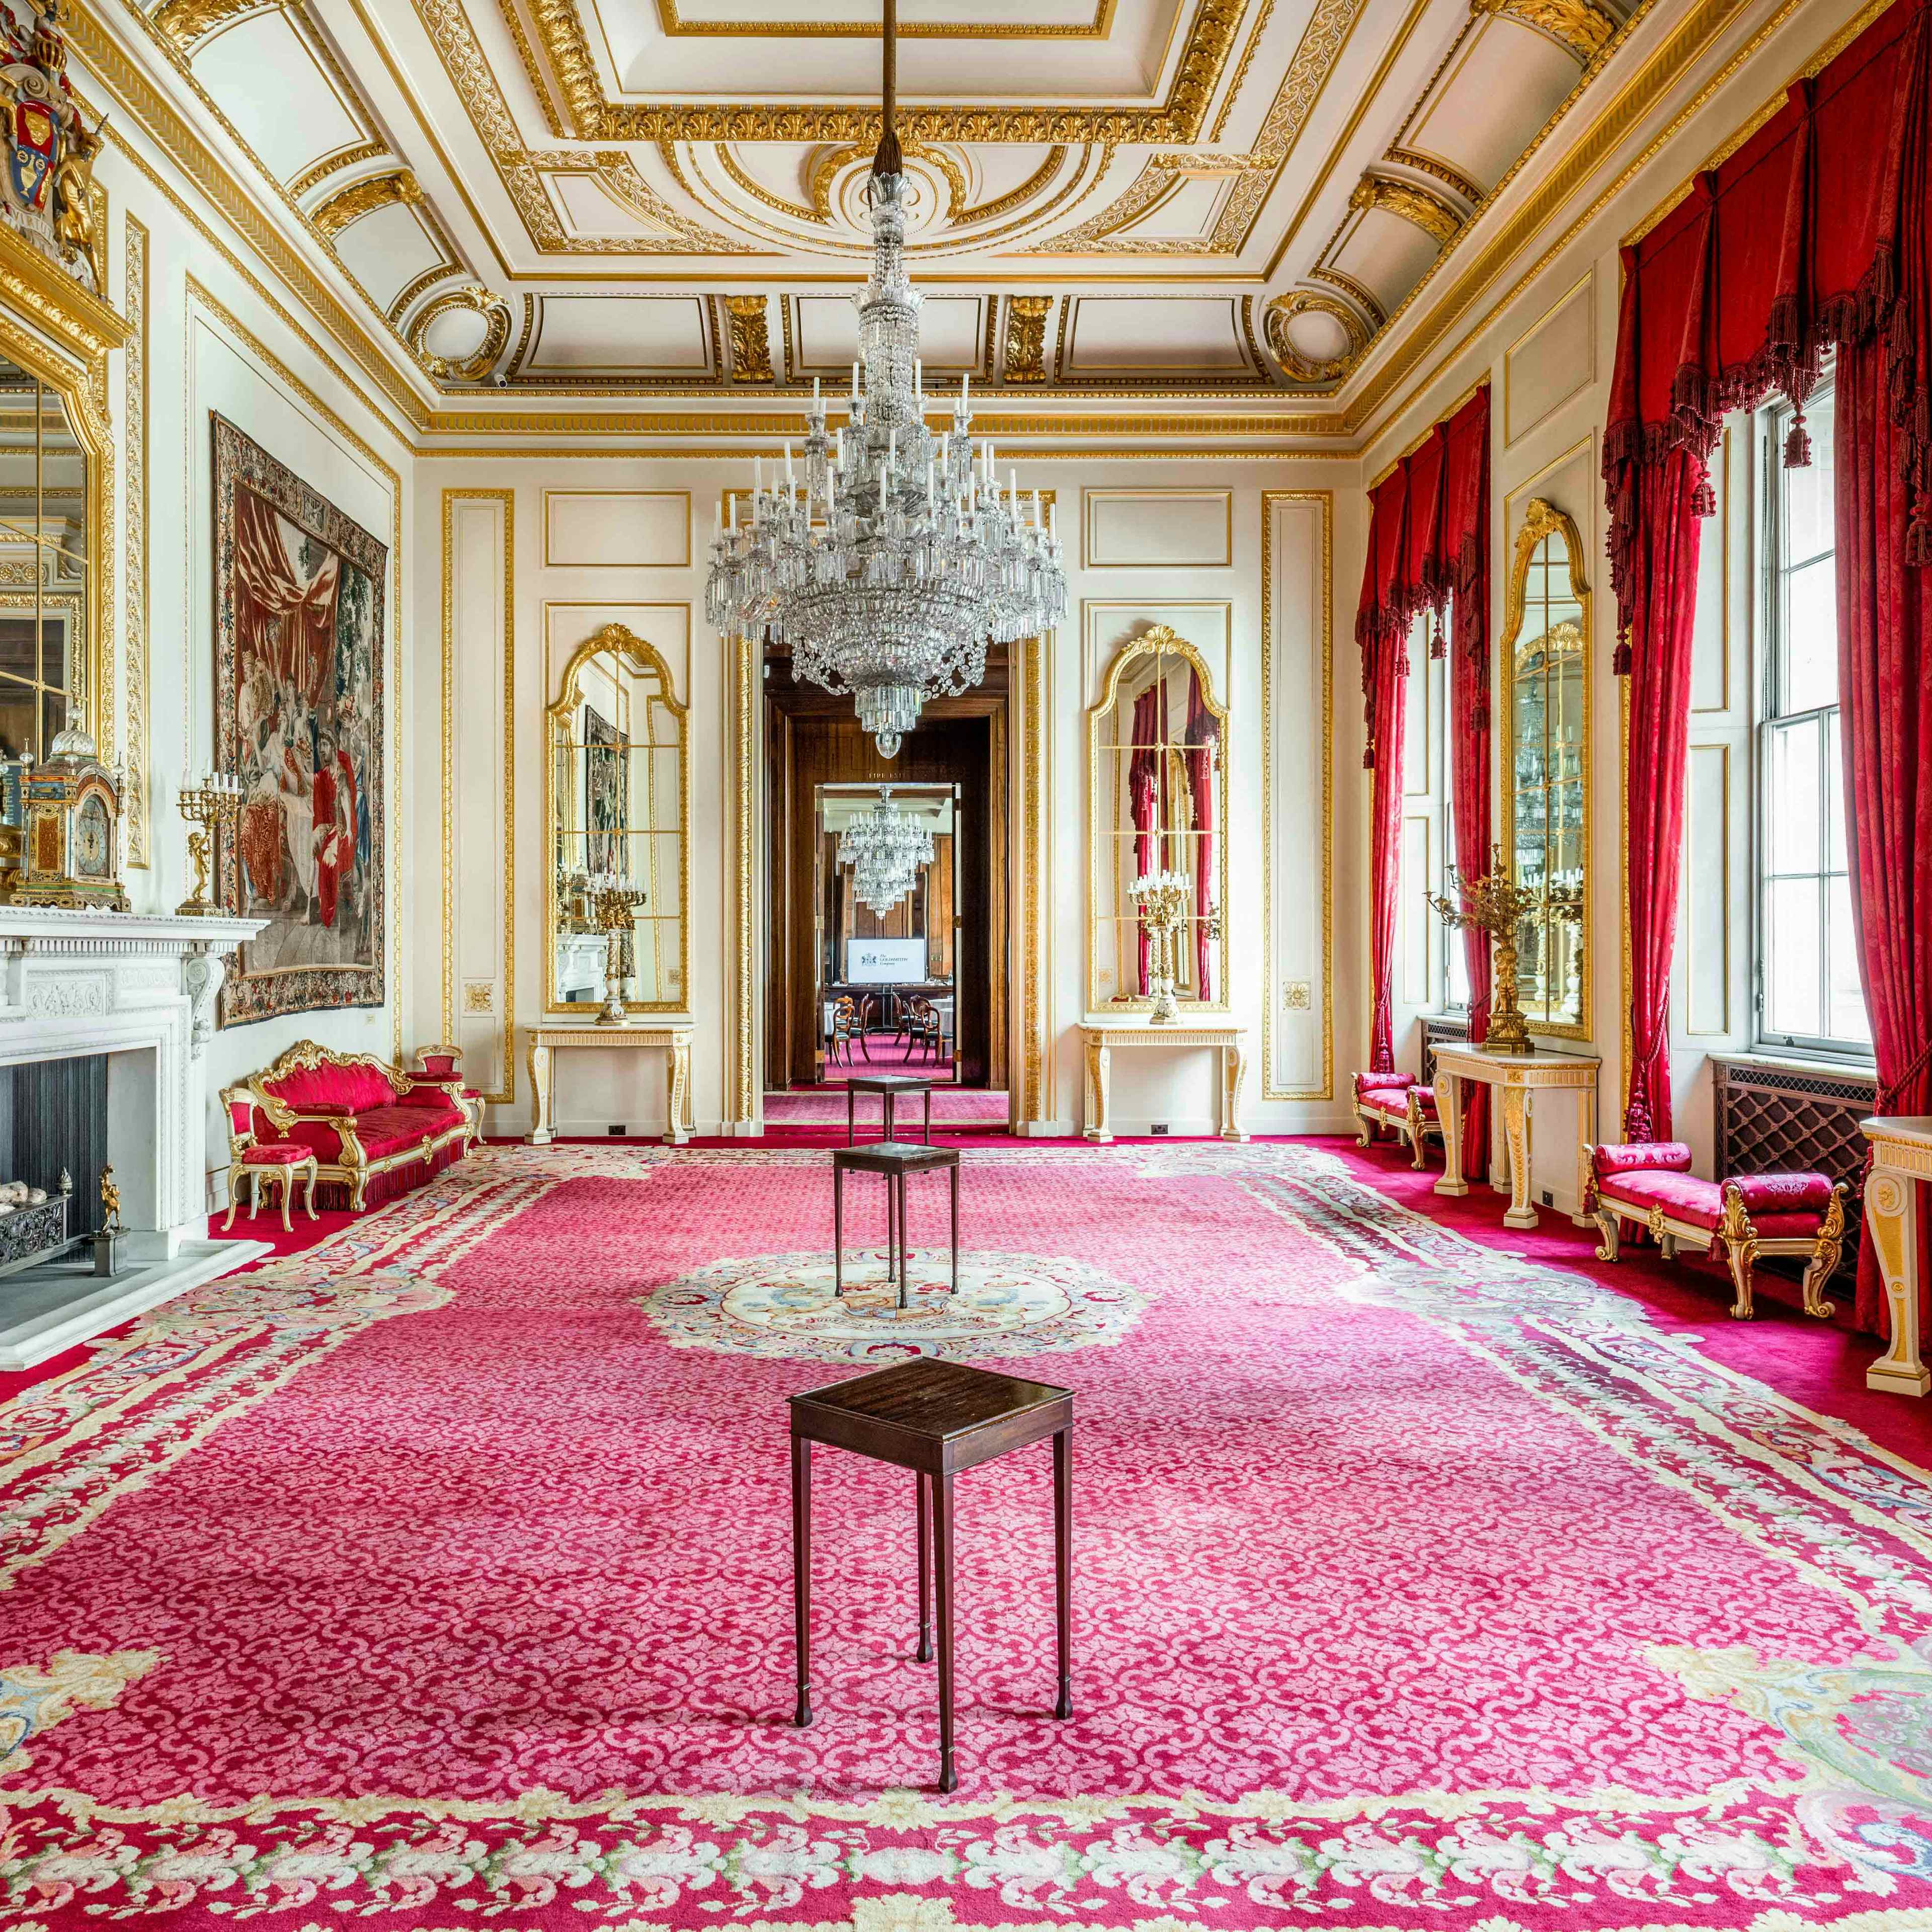 Goldsmiths' Hall - The Drawing Room image 3